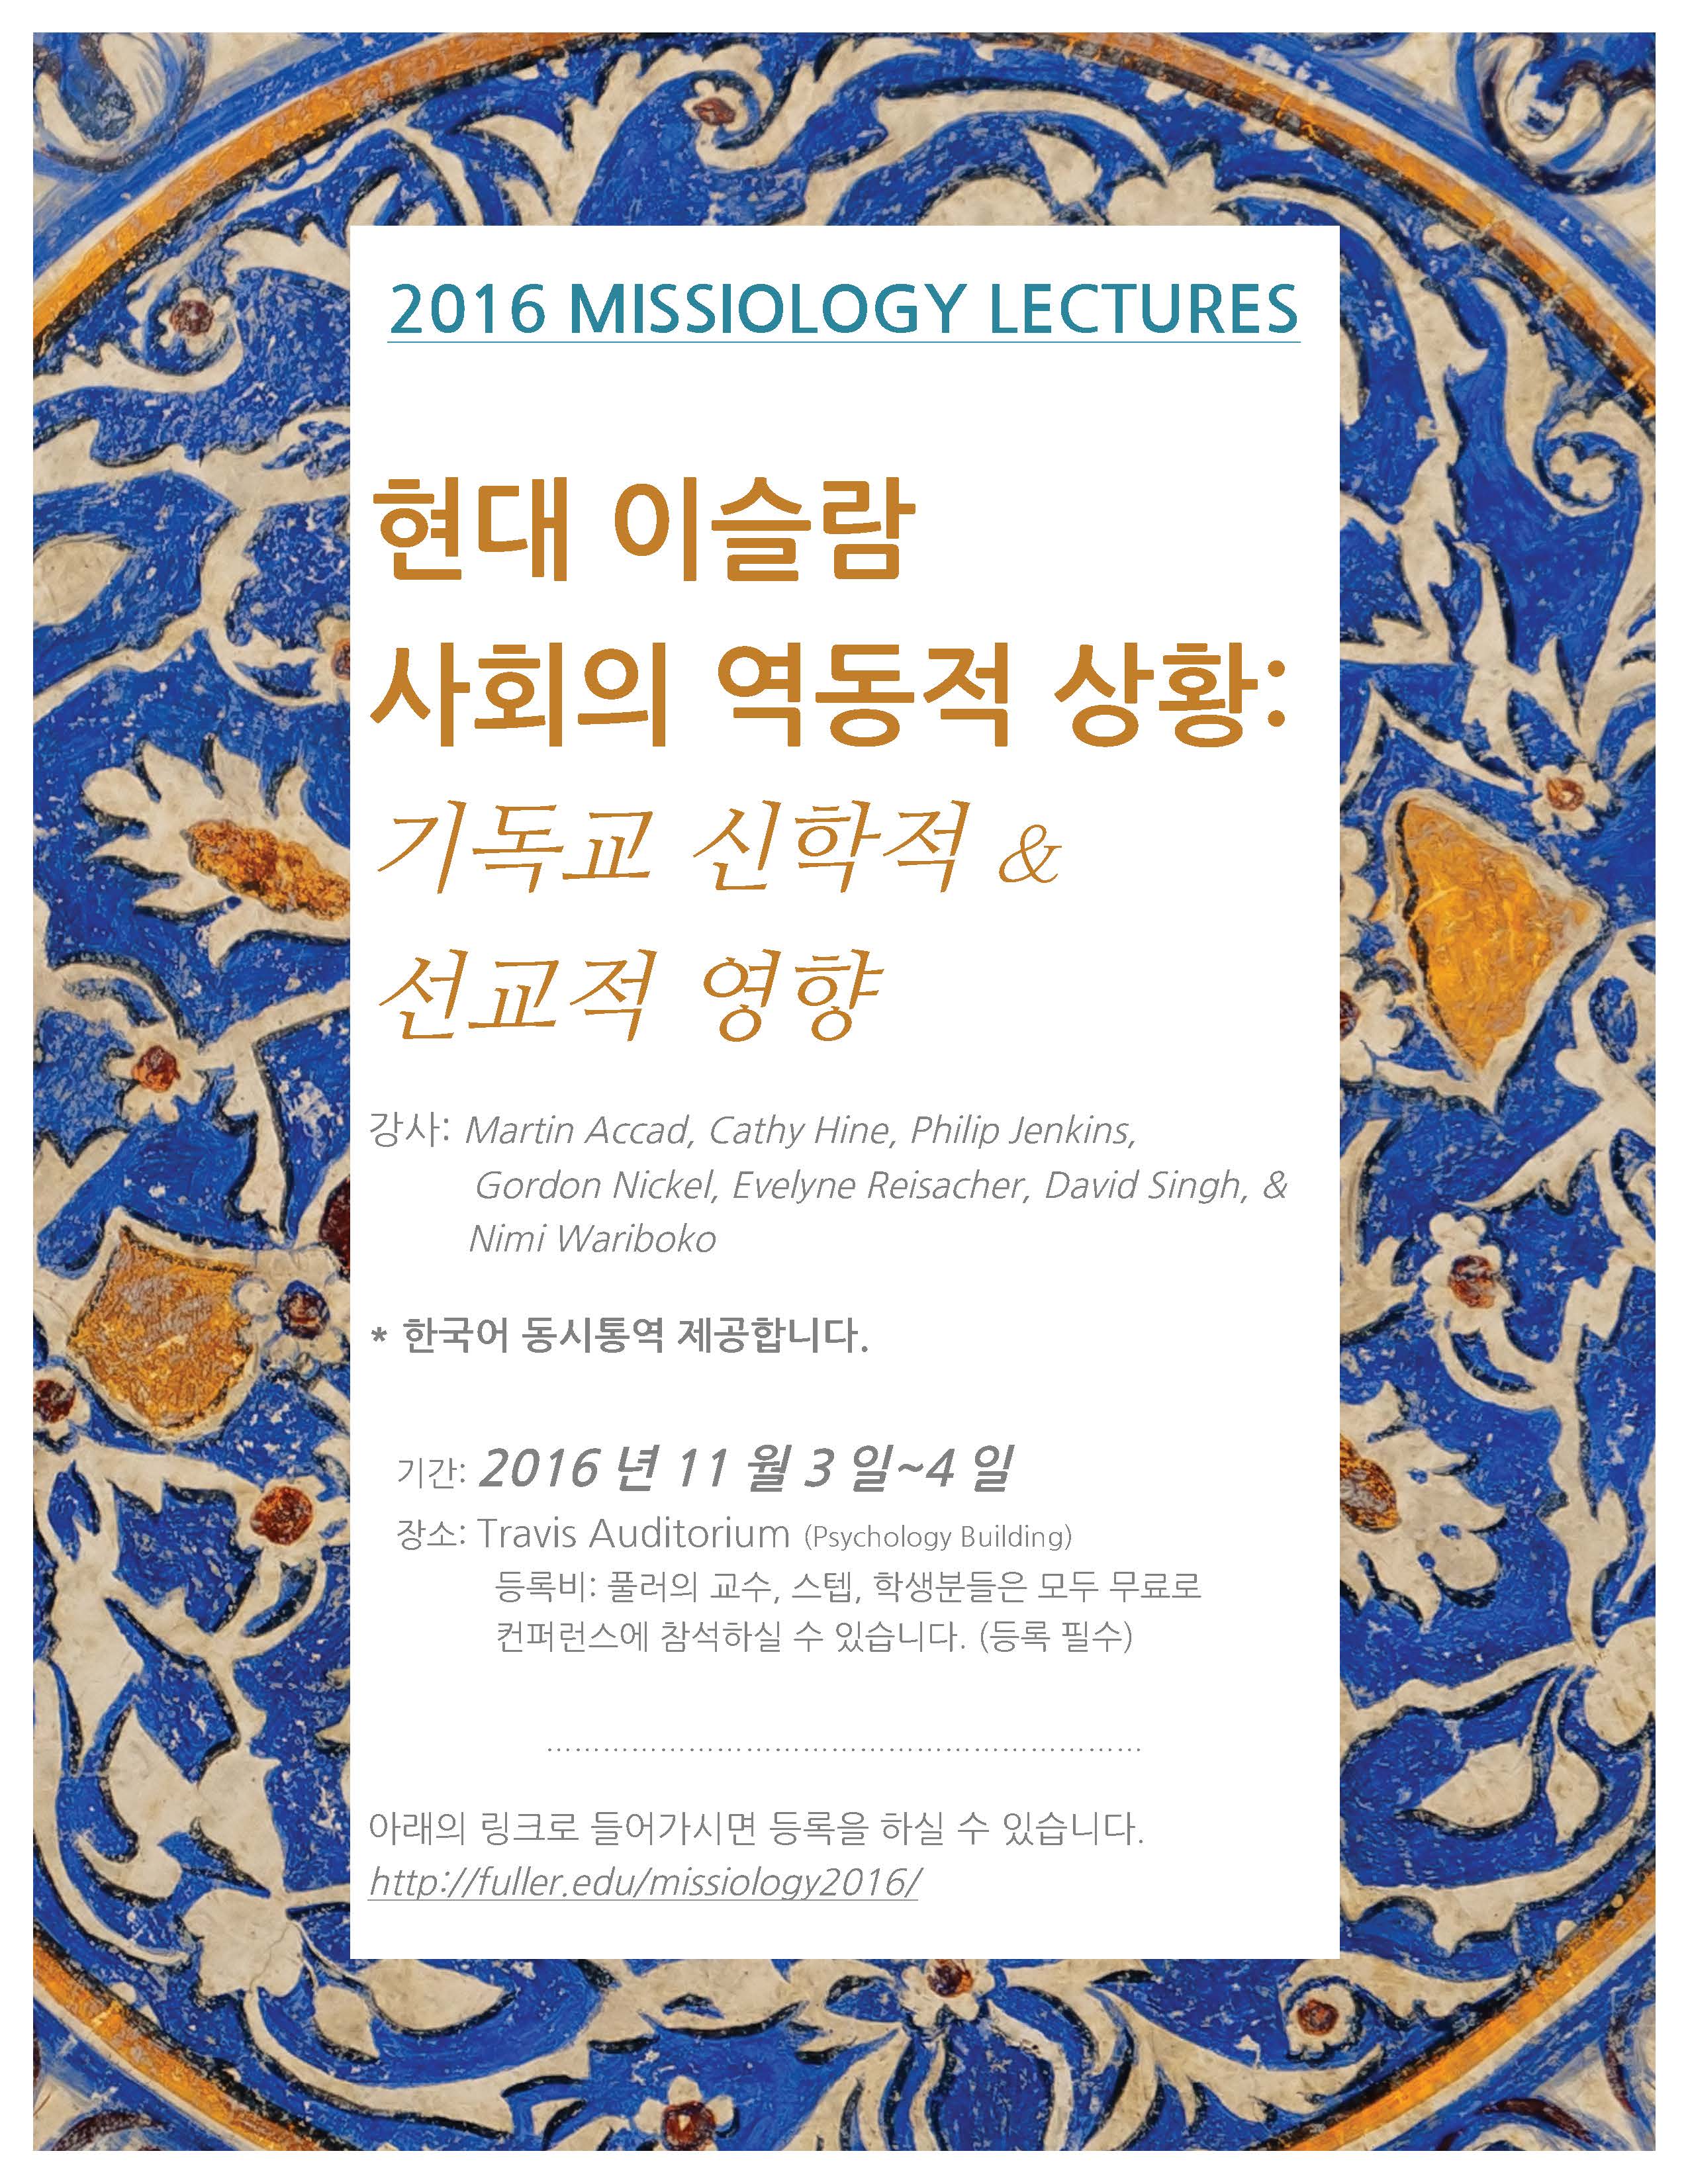 Blank Missiology Lectures Poster_8.5x11_KO.jpg